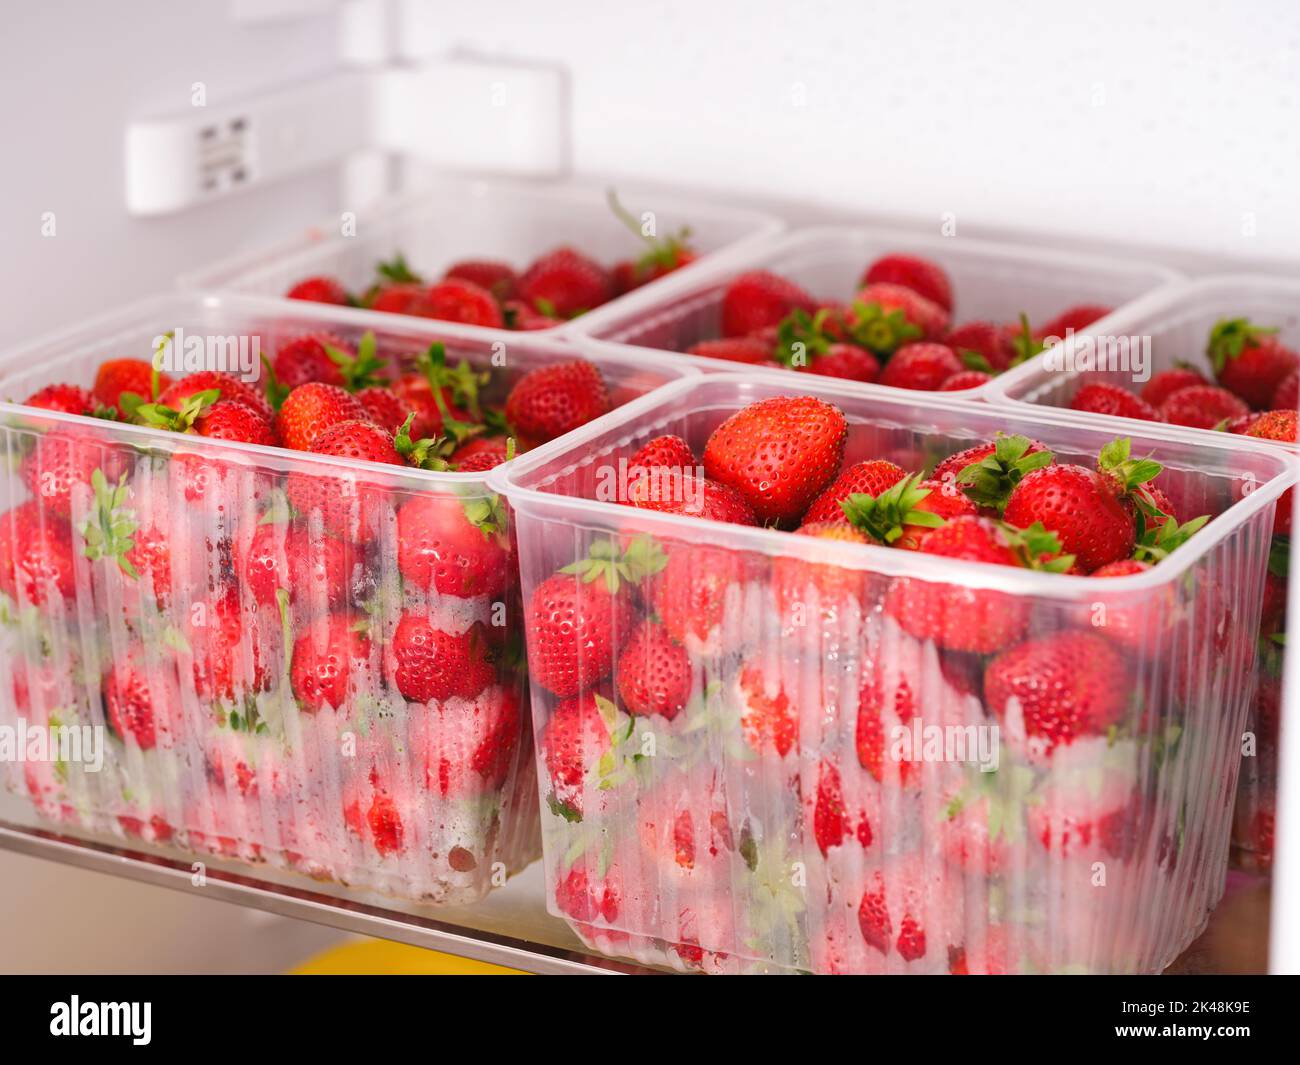 Five plastic containers with organic red strawberries in them in a refrigerator Stock Photo